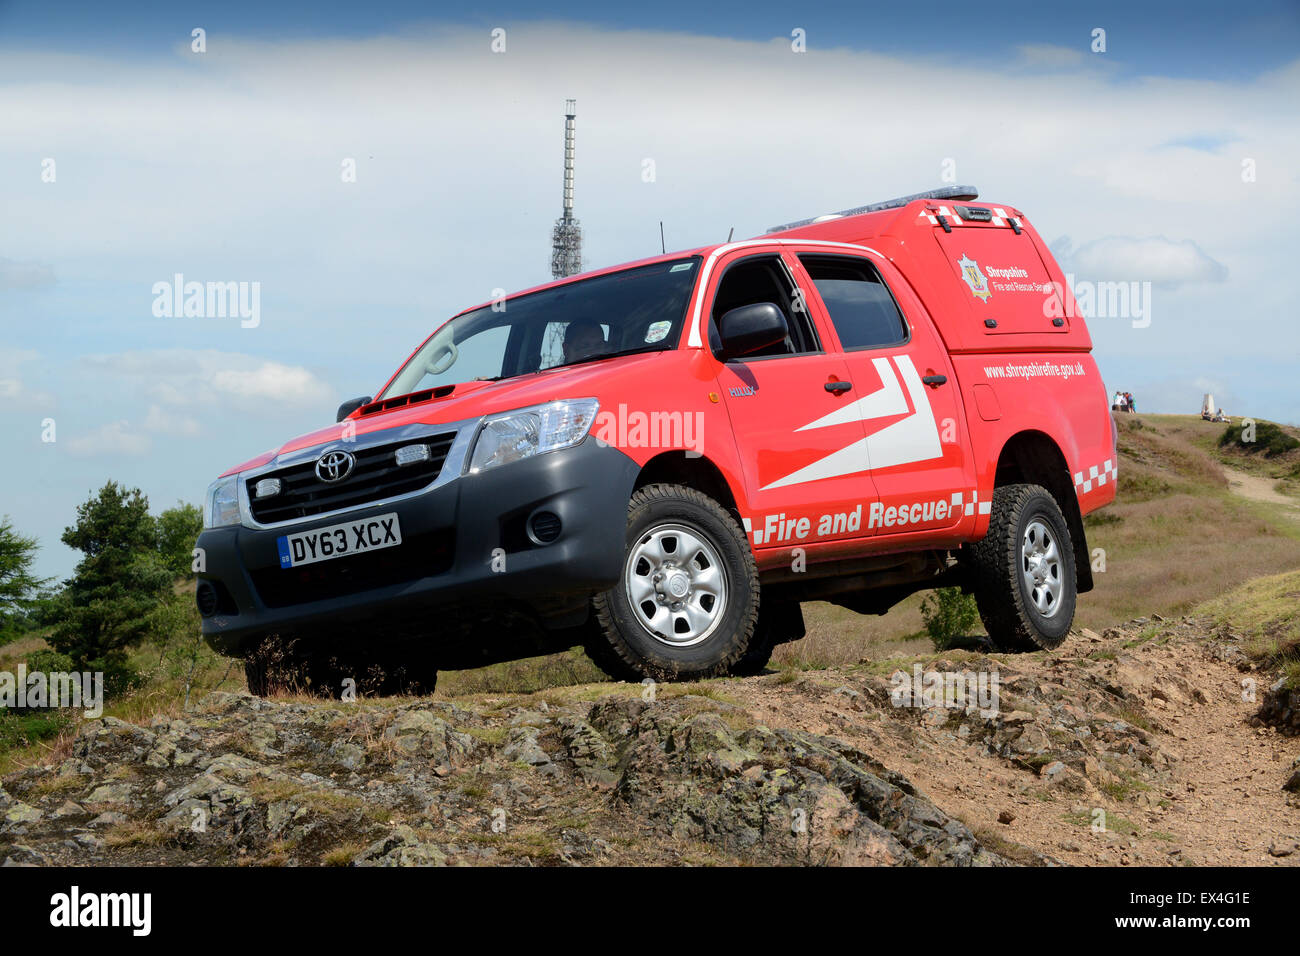 Shropshire Fire and Rescue service vehicle Toyota Hilux on the Wrekin Hill in Shropshire Stock Photo